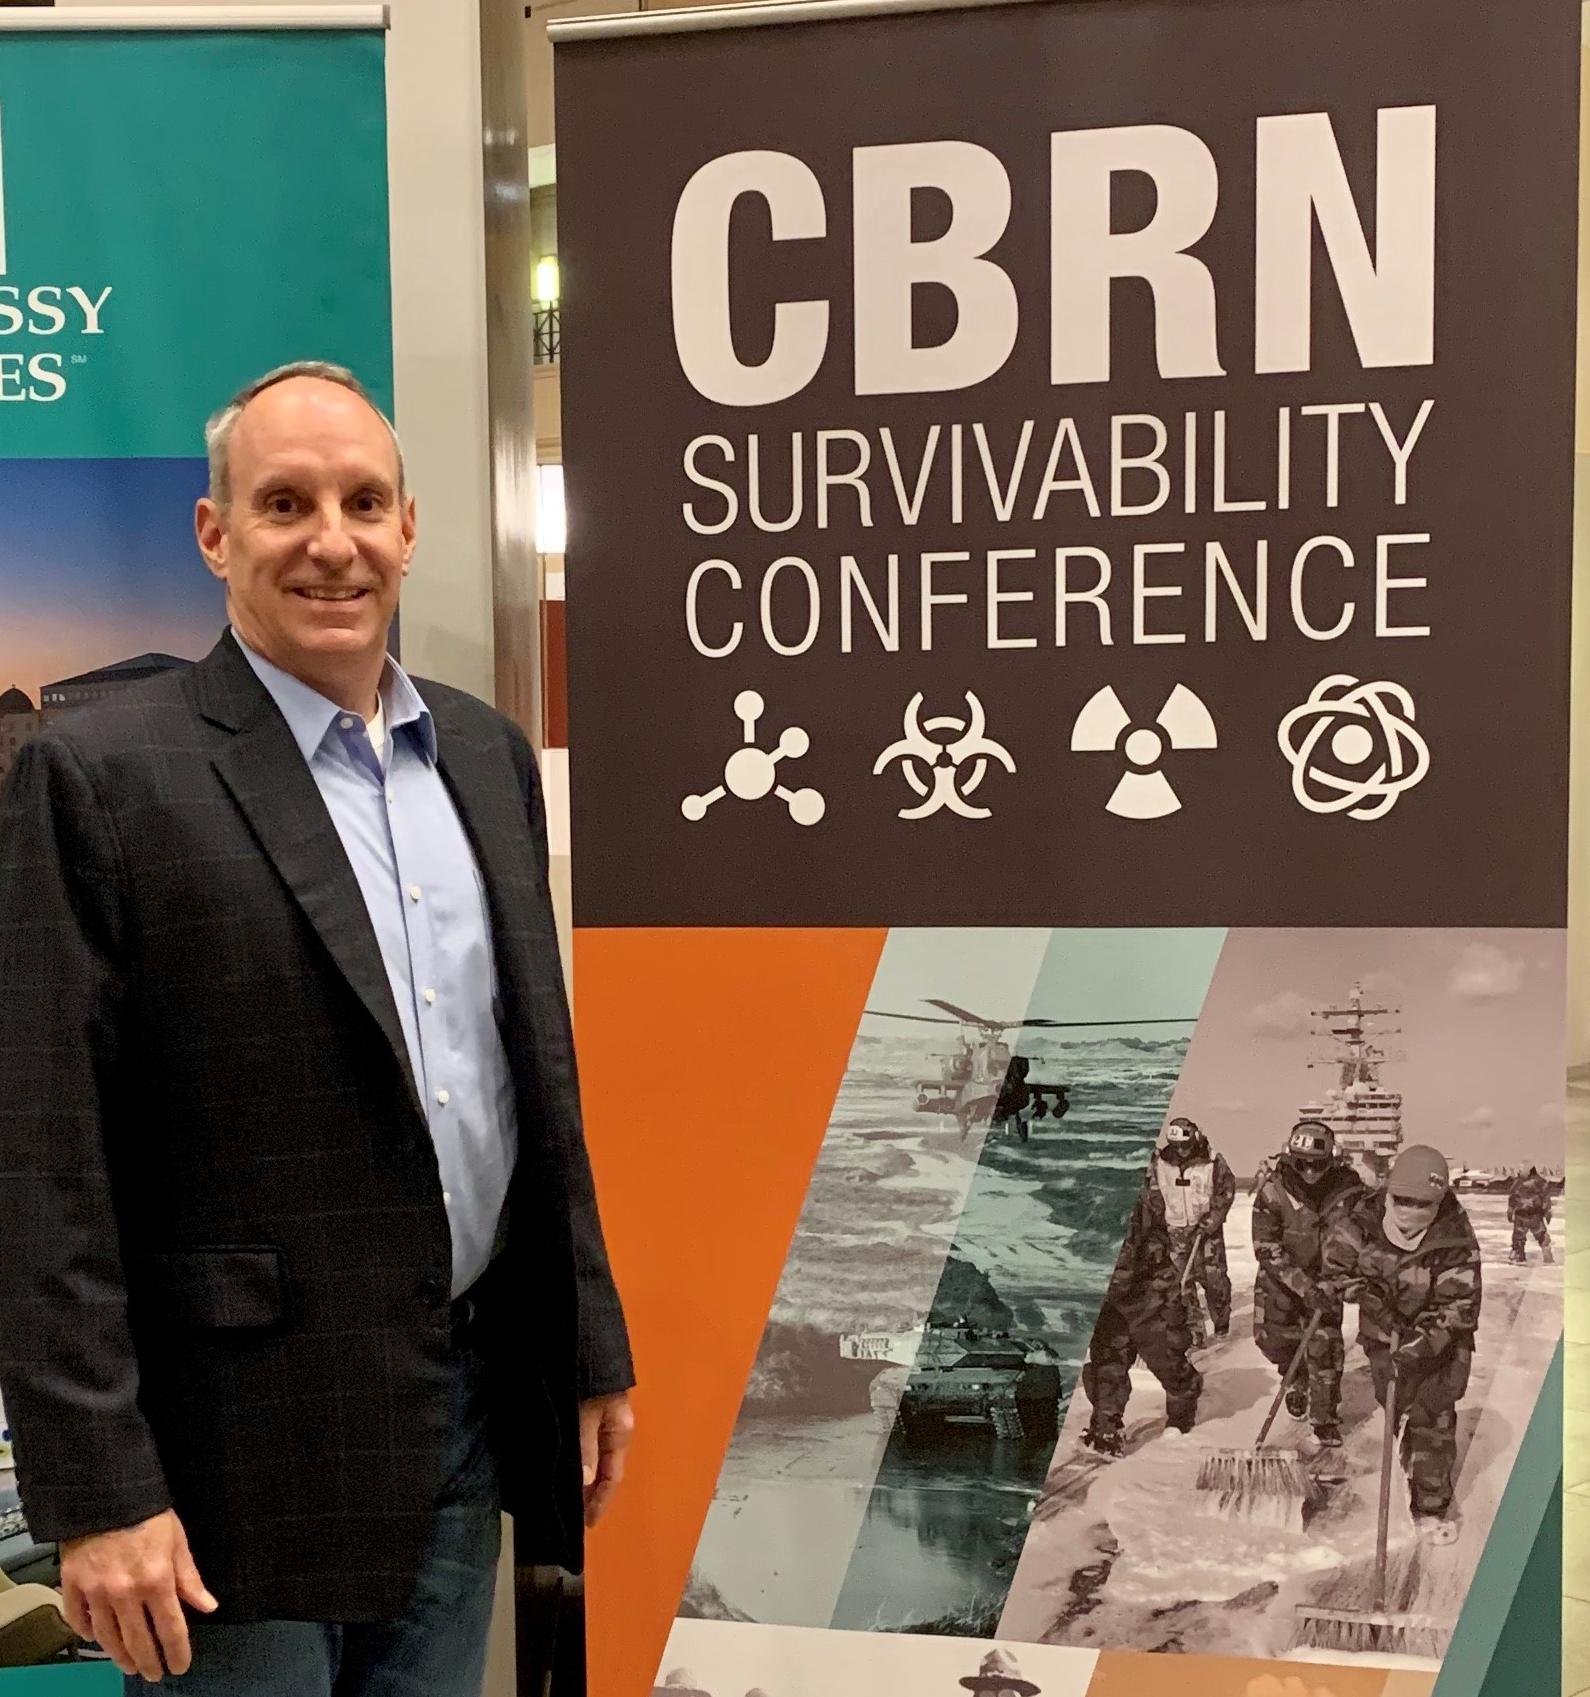 Ron Fizer in front of a banner for the CBRN Survivability Conference